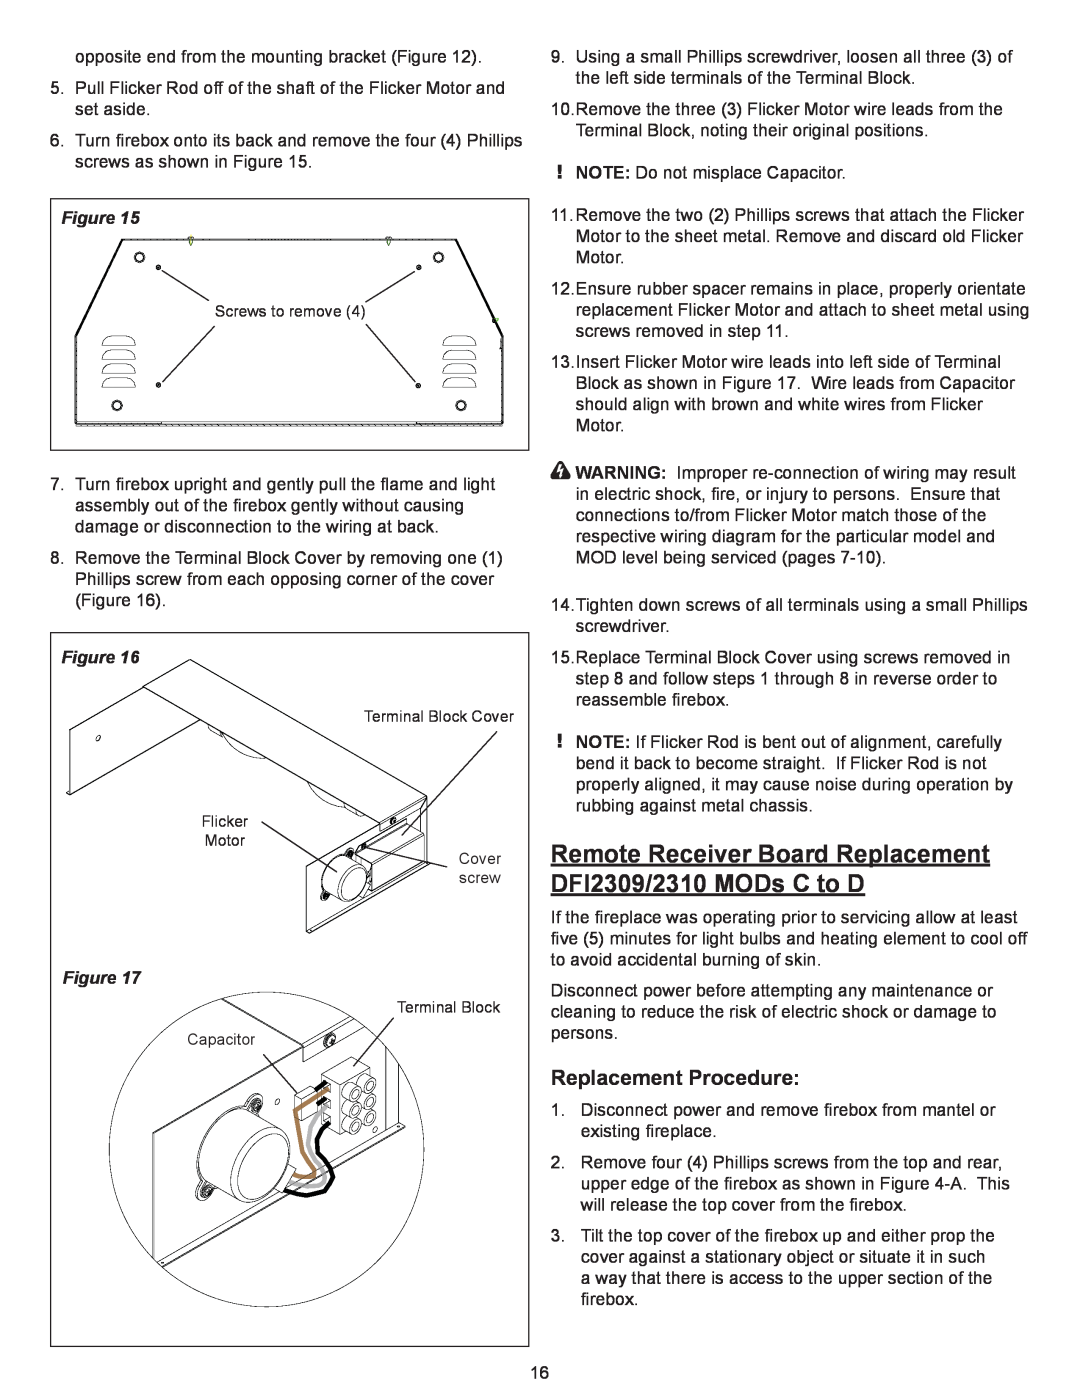 Dimplex Dimplex DFI2309 service manual Replacement Procedure, opposite end from the mounting bracket Figure 